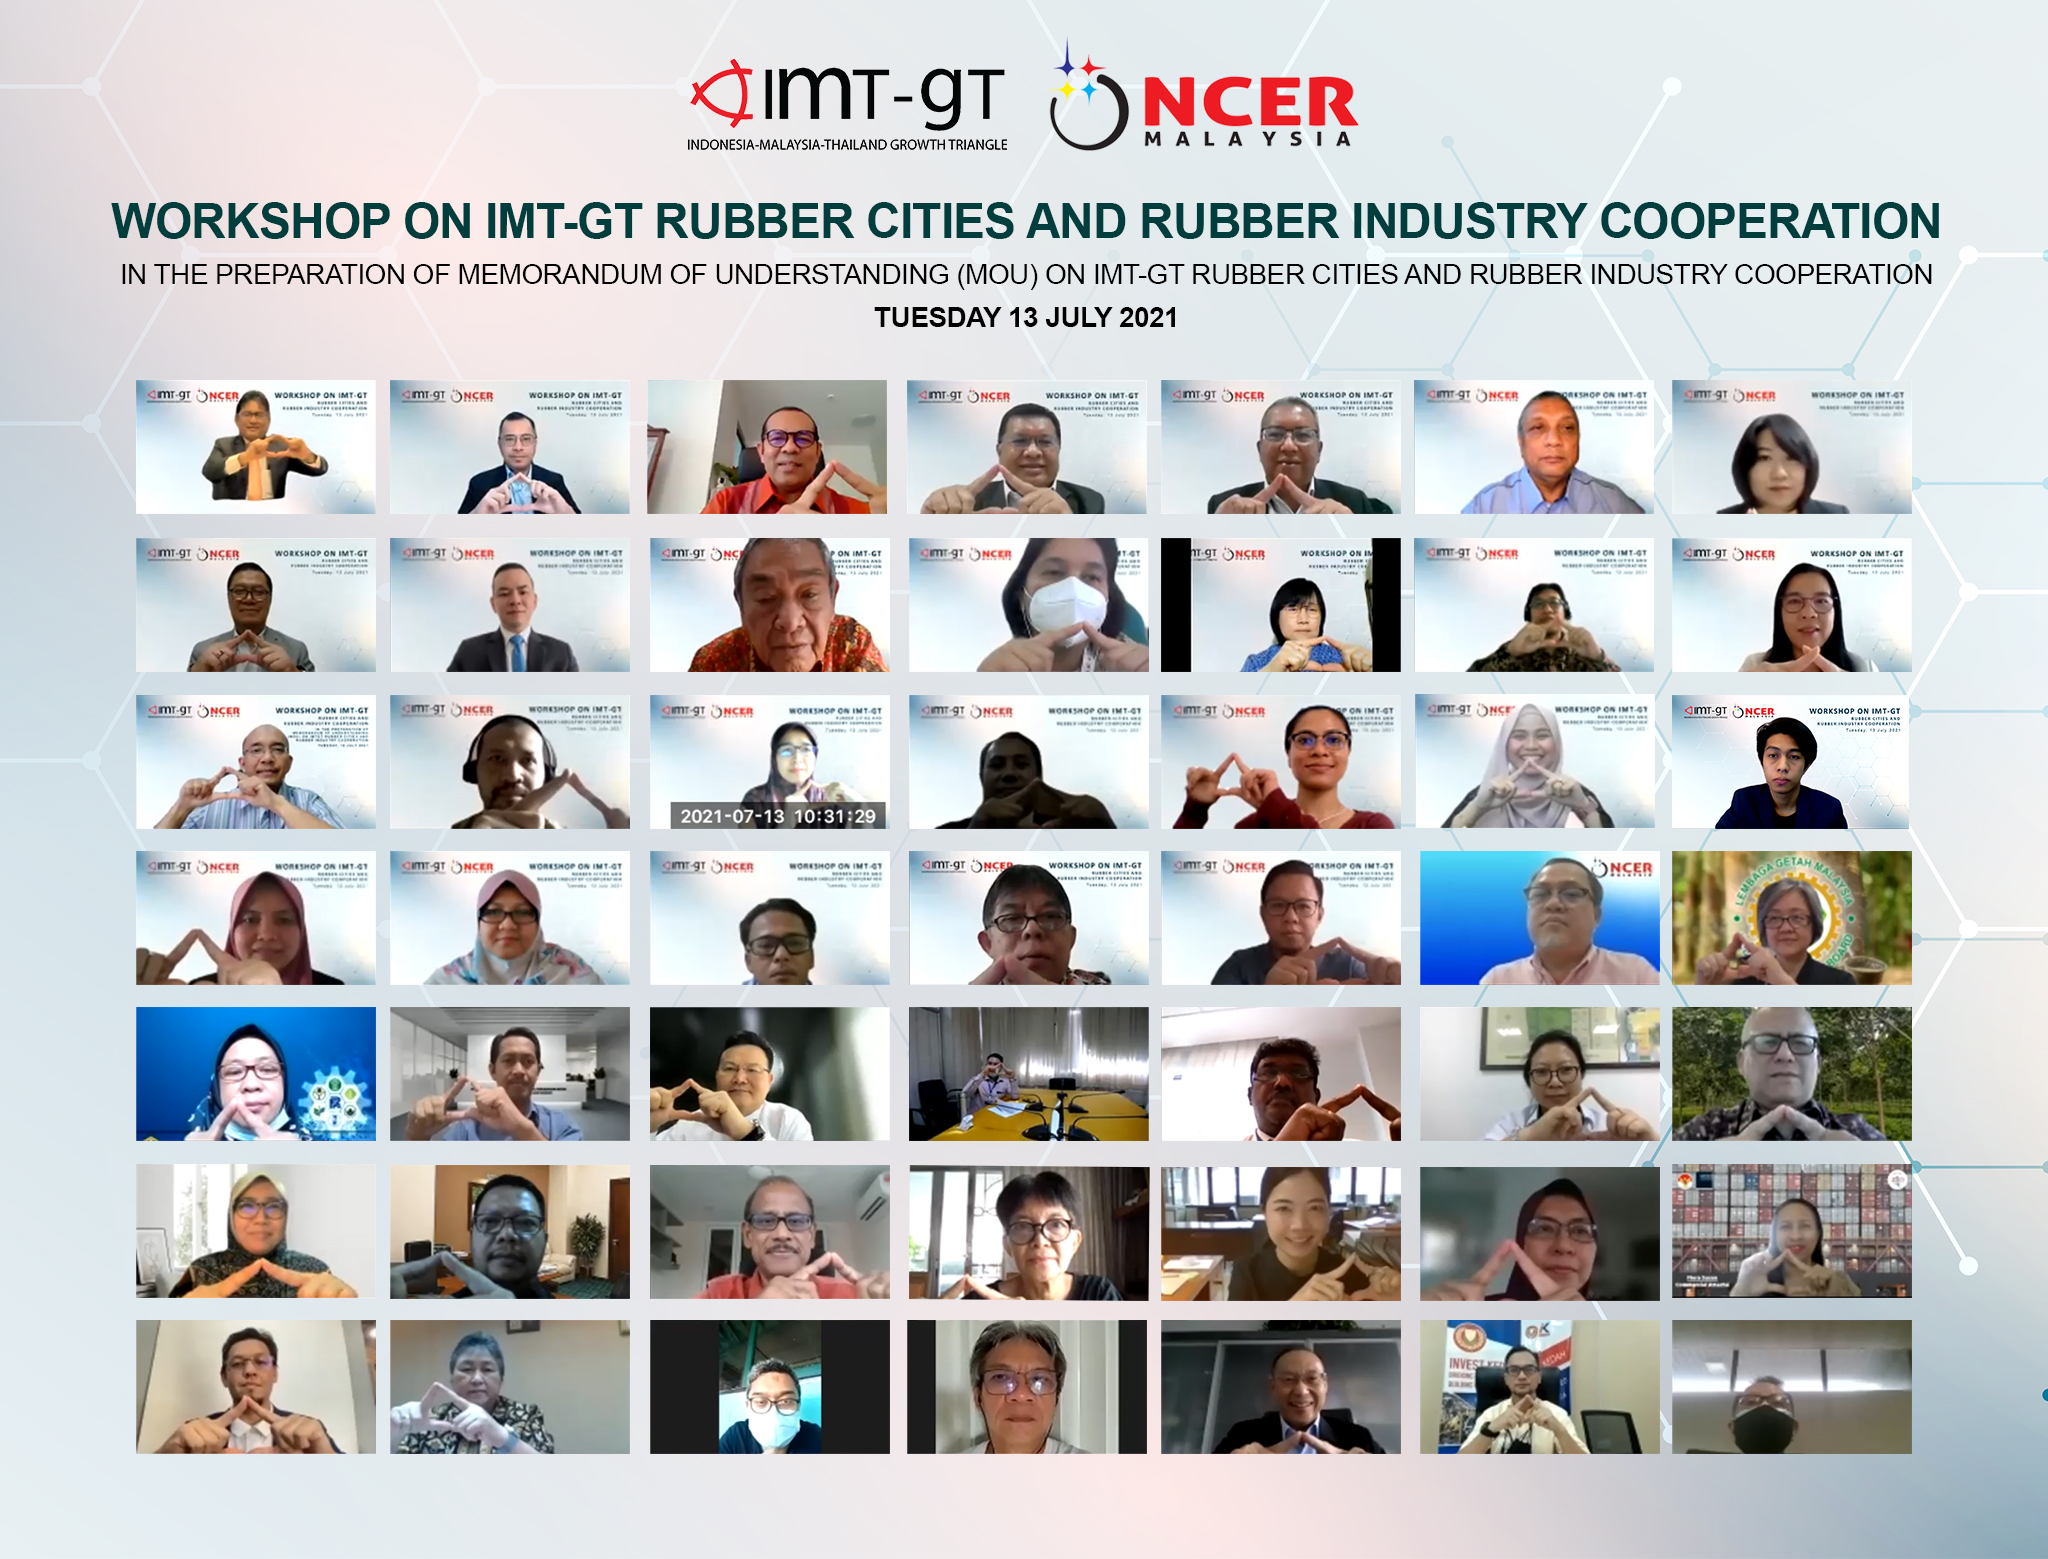 IMT-GT WORKSHOP ON RUBBER CITIES & RUBBER INDUSTRY COOPERATION